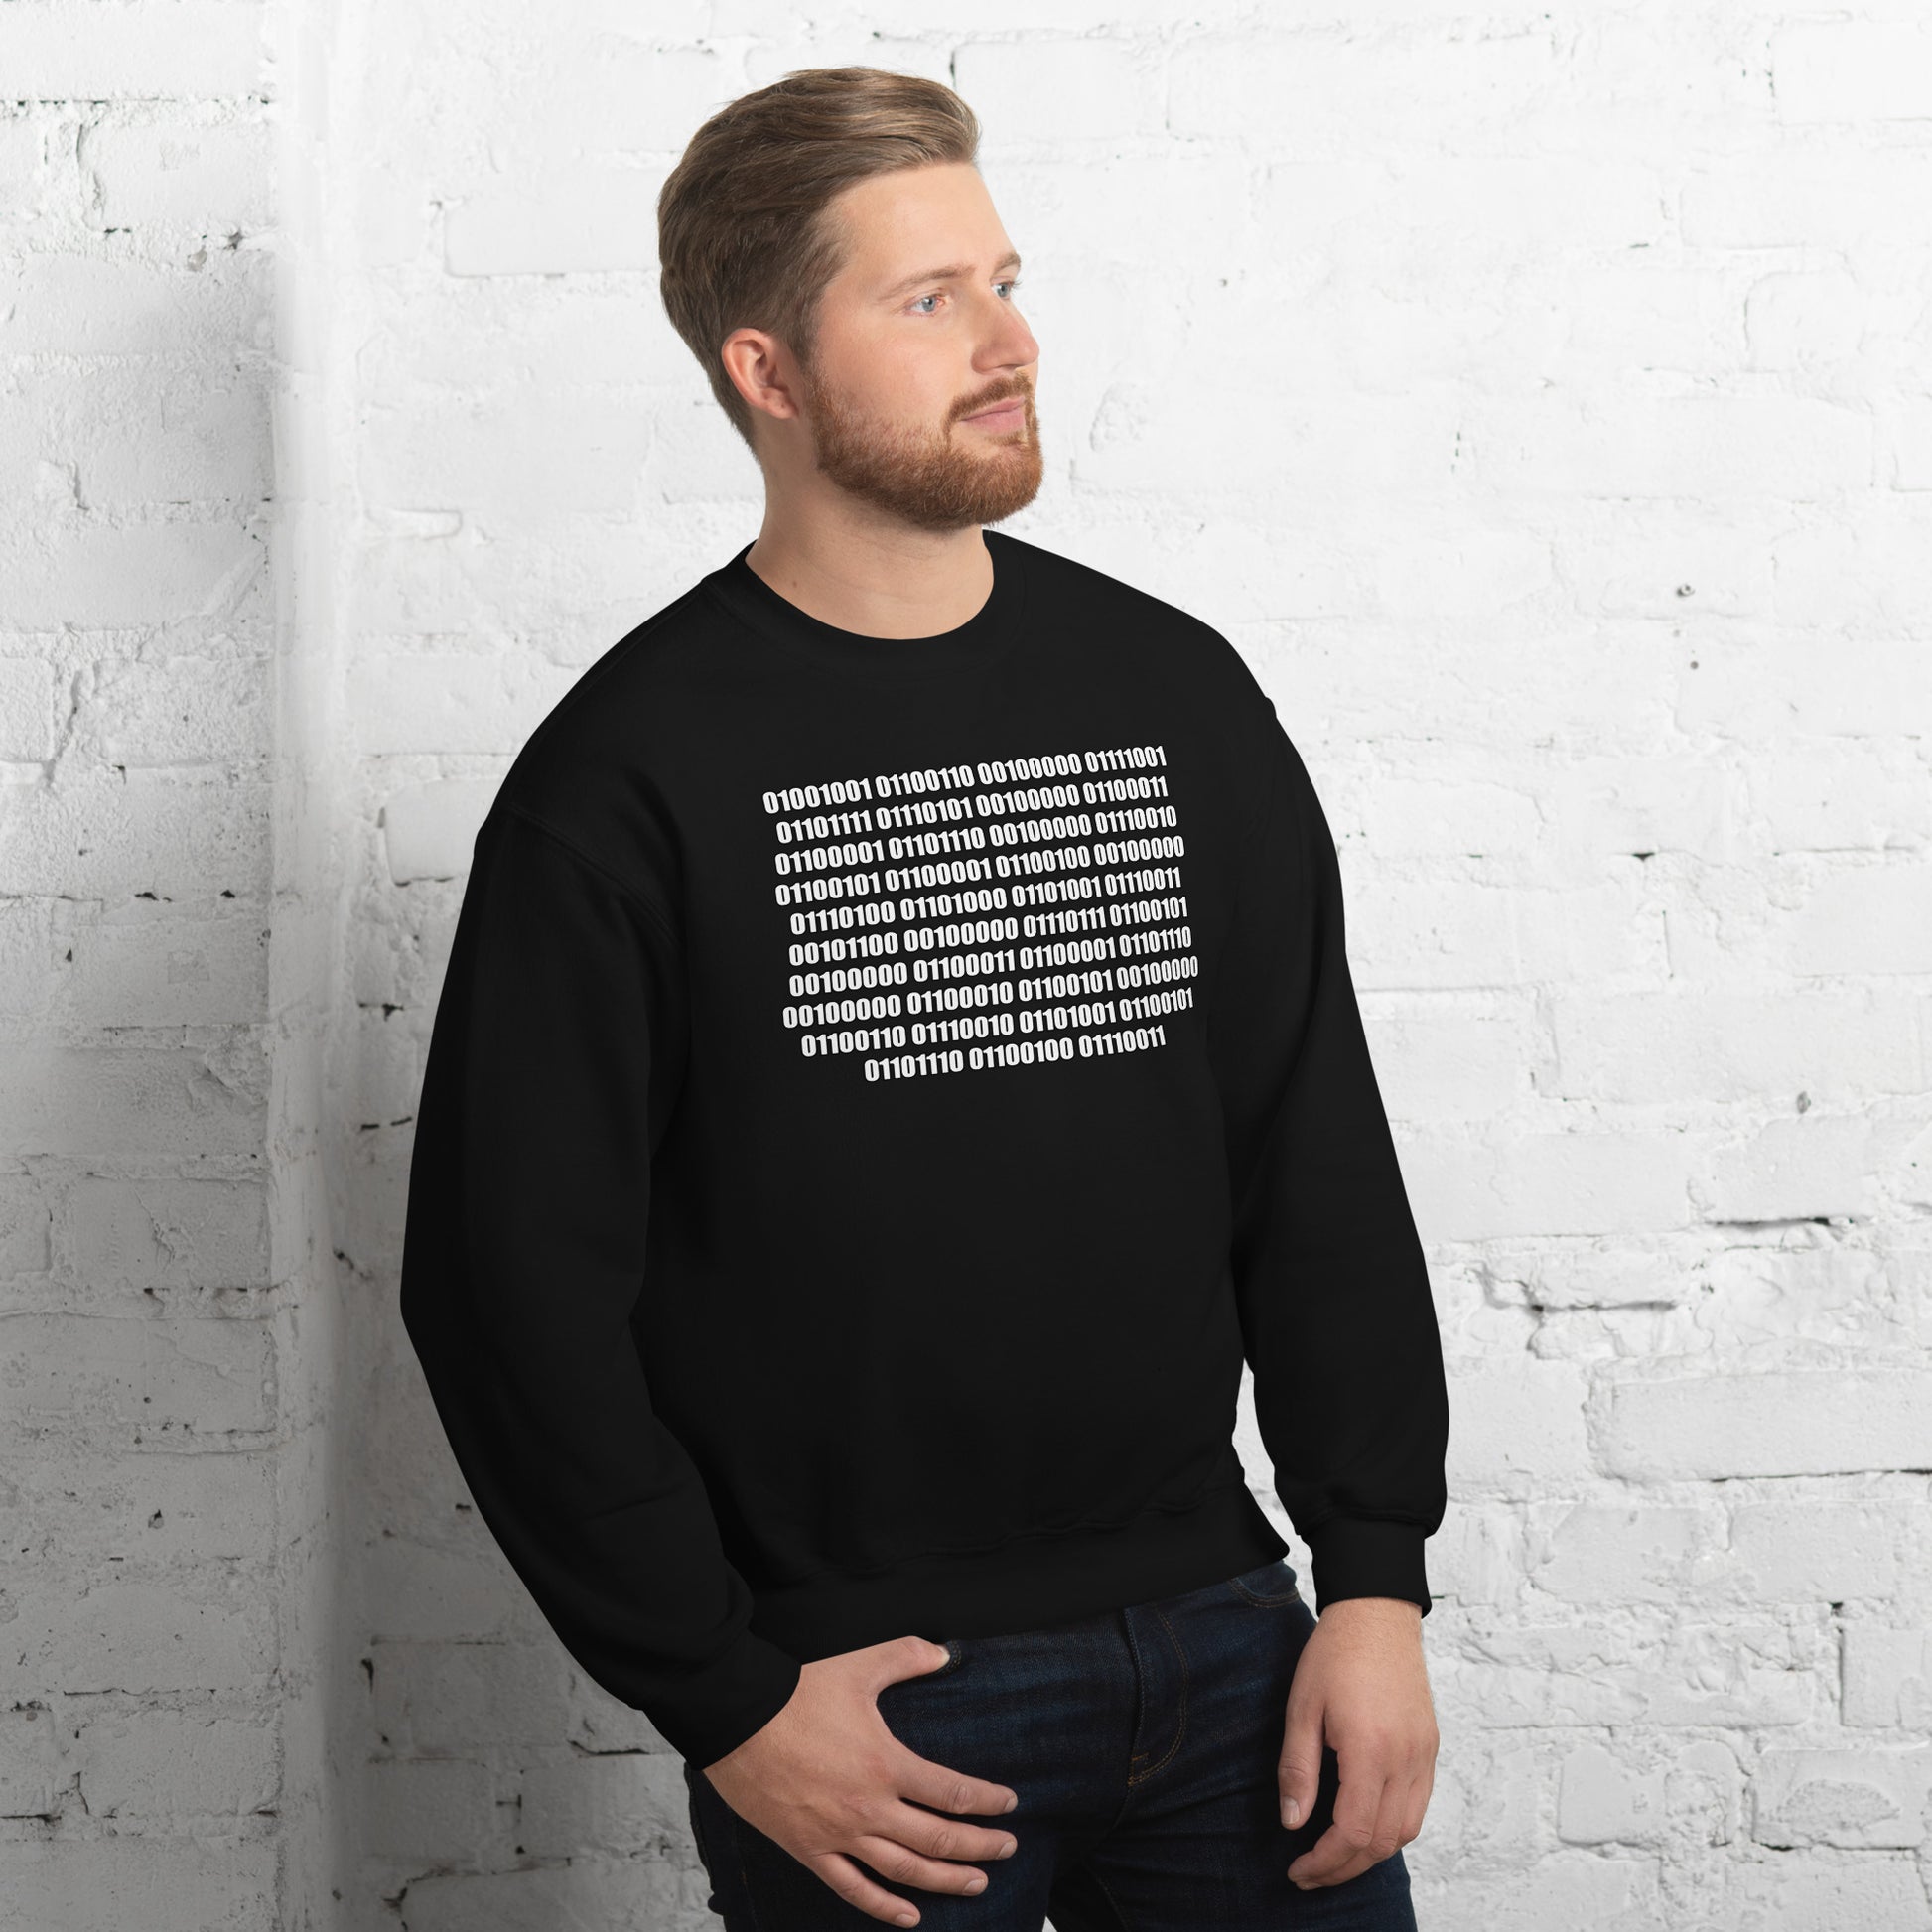 Men with black sweatshirt with binaire text "If you can read this"